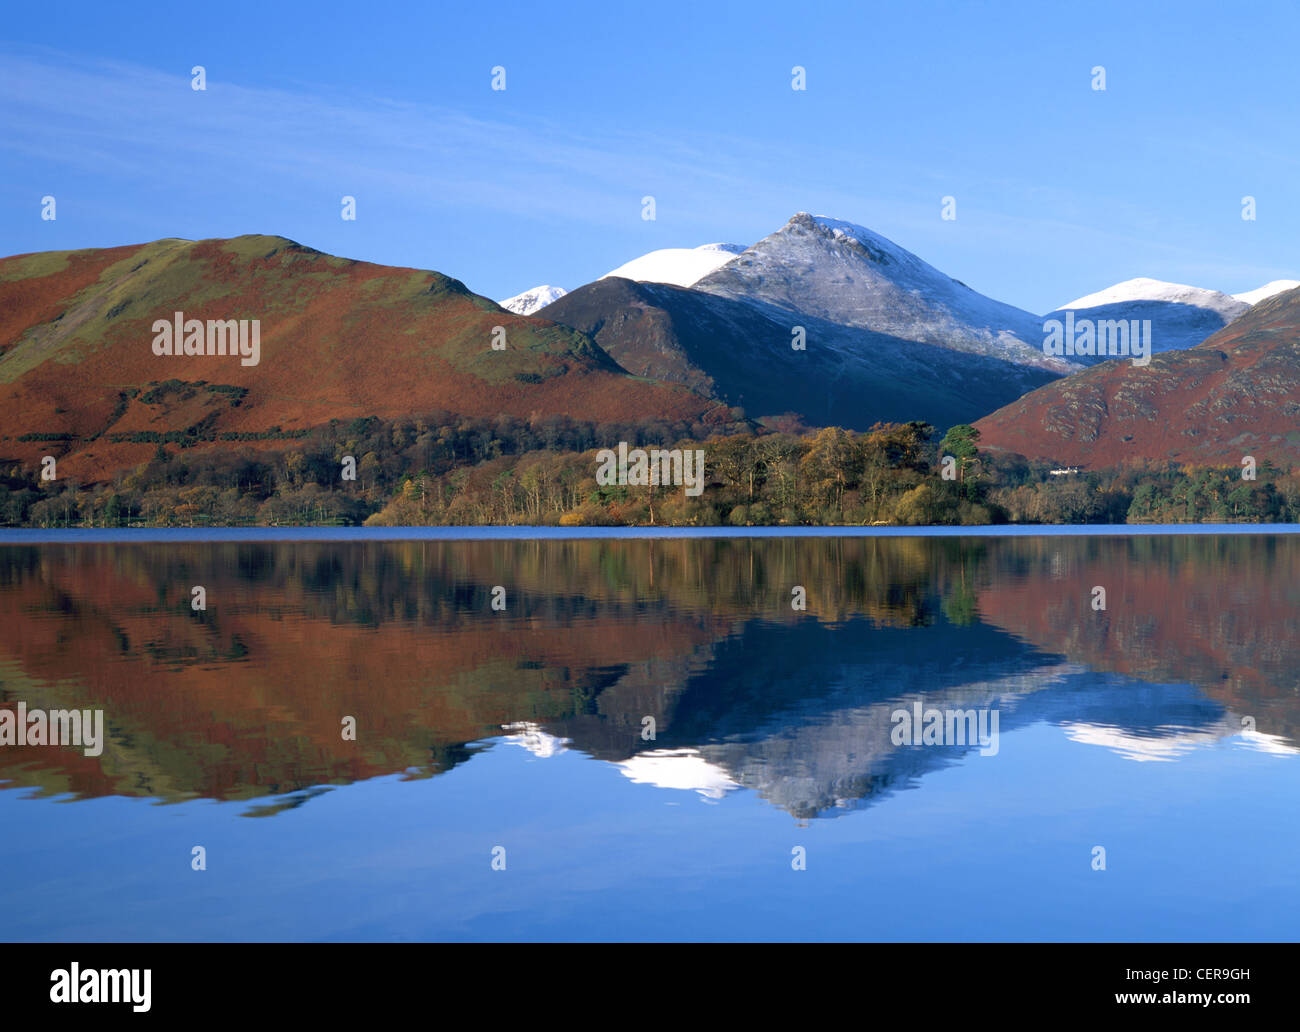 Looking across Derwent Water on a calm day. Derwent Water is one of the principal bodies of water in the Lake District. Stock Photo